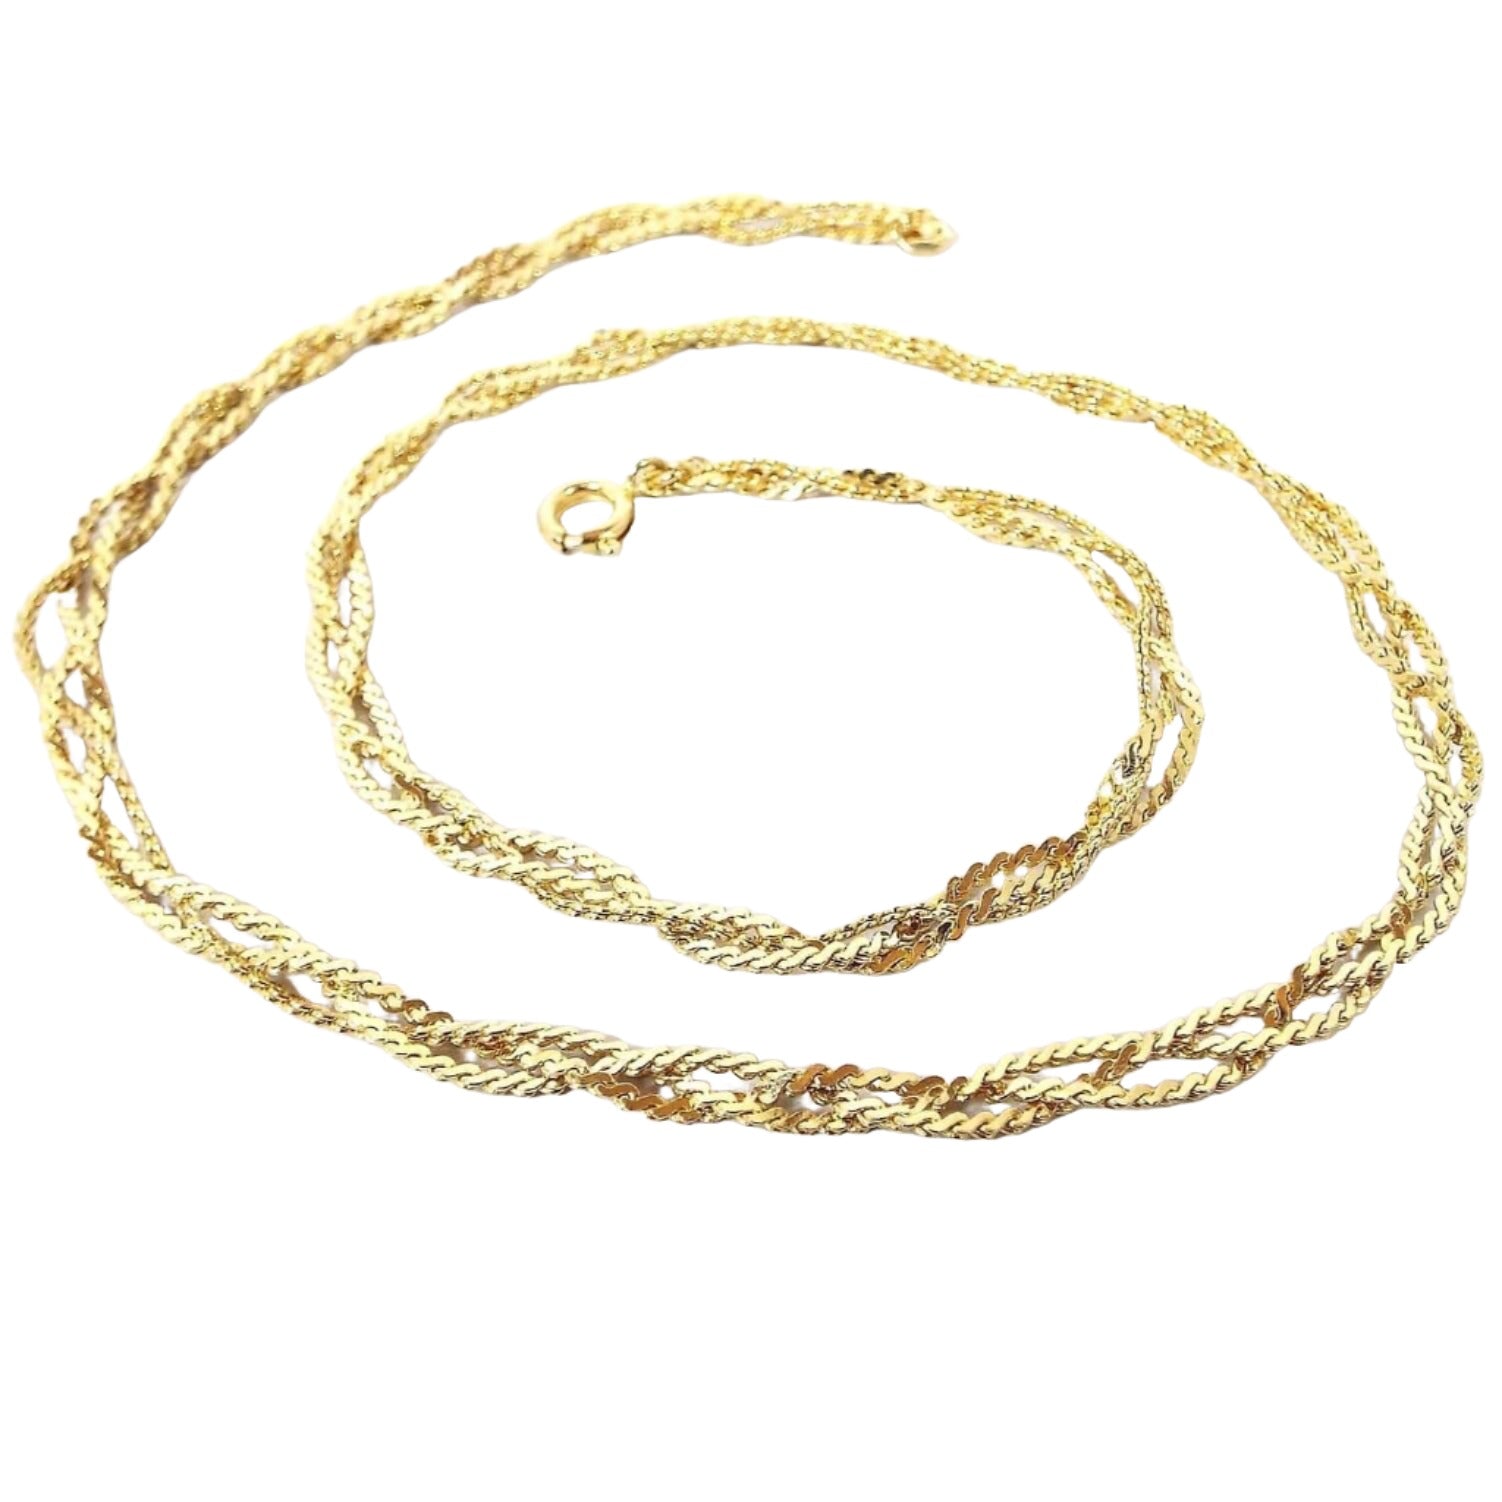 Top view of the retro vintage multi strand chain necklace. The metal is gold tone in color. There are three strands of thinner sized serpentine chain that are braided together giving it a twist like design. There is a round spring ring clasp at the end.